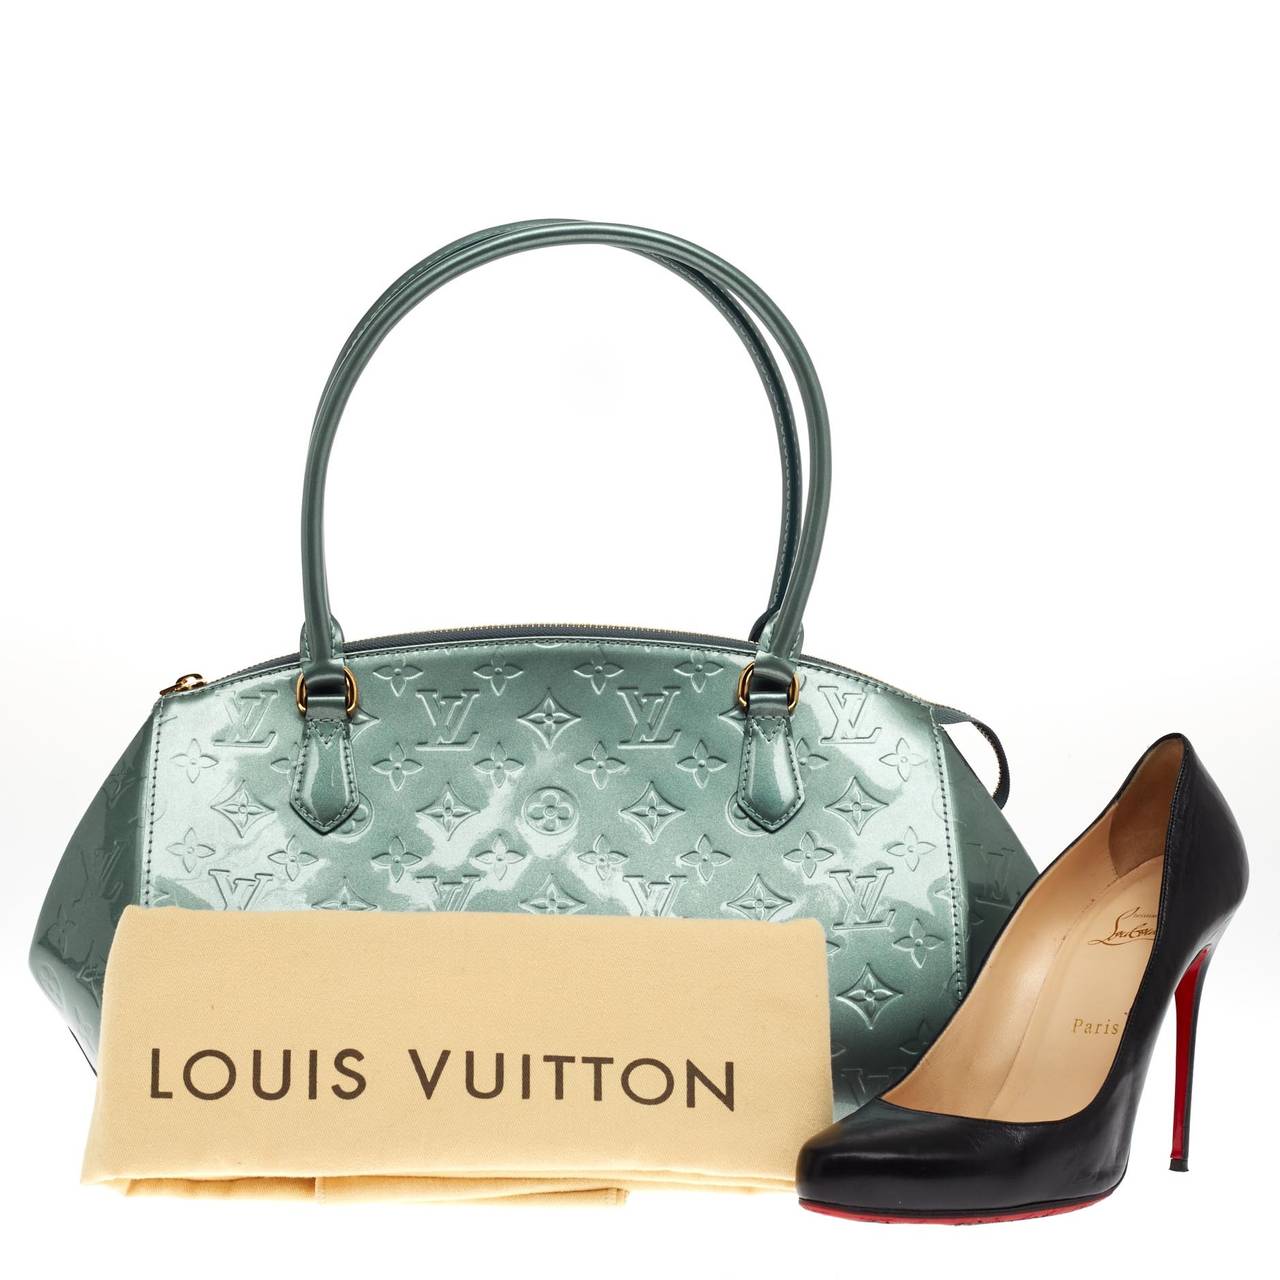 This authentic Louis Vuitton Sherwood Monogram Vernis in size GM comes in a lovely Givre blue shade accented with gold tone hardware. Constructed of sturdy Vernis leather, this dome bag features long dual-rolled leather handles that is perfect for